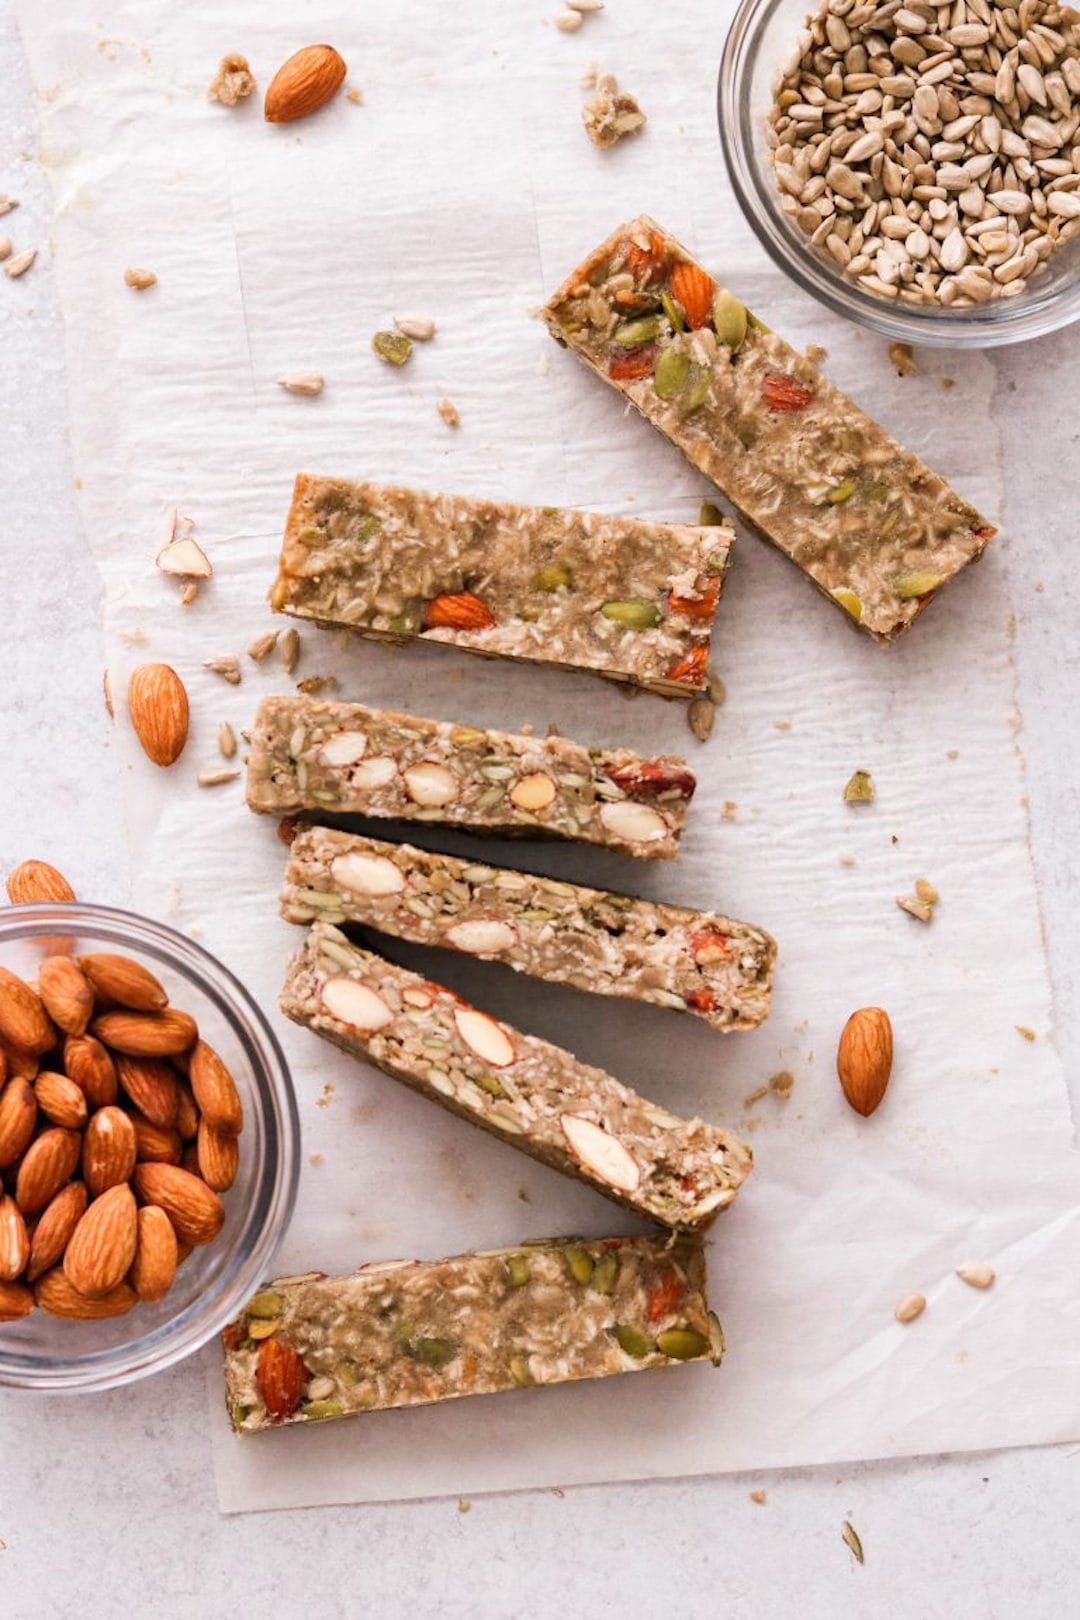 paleo protein bars on a tray with almonds